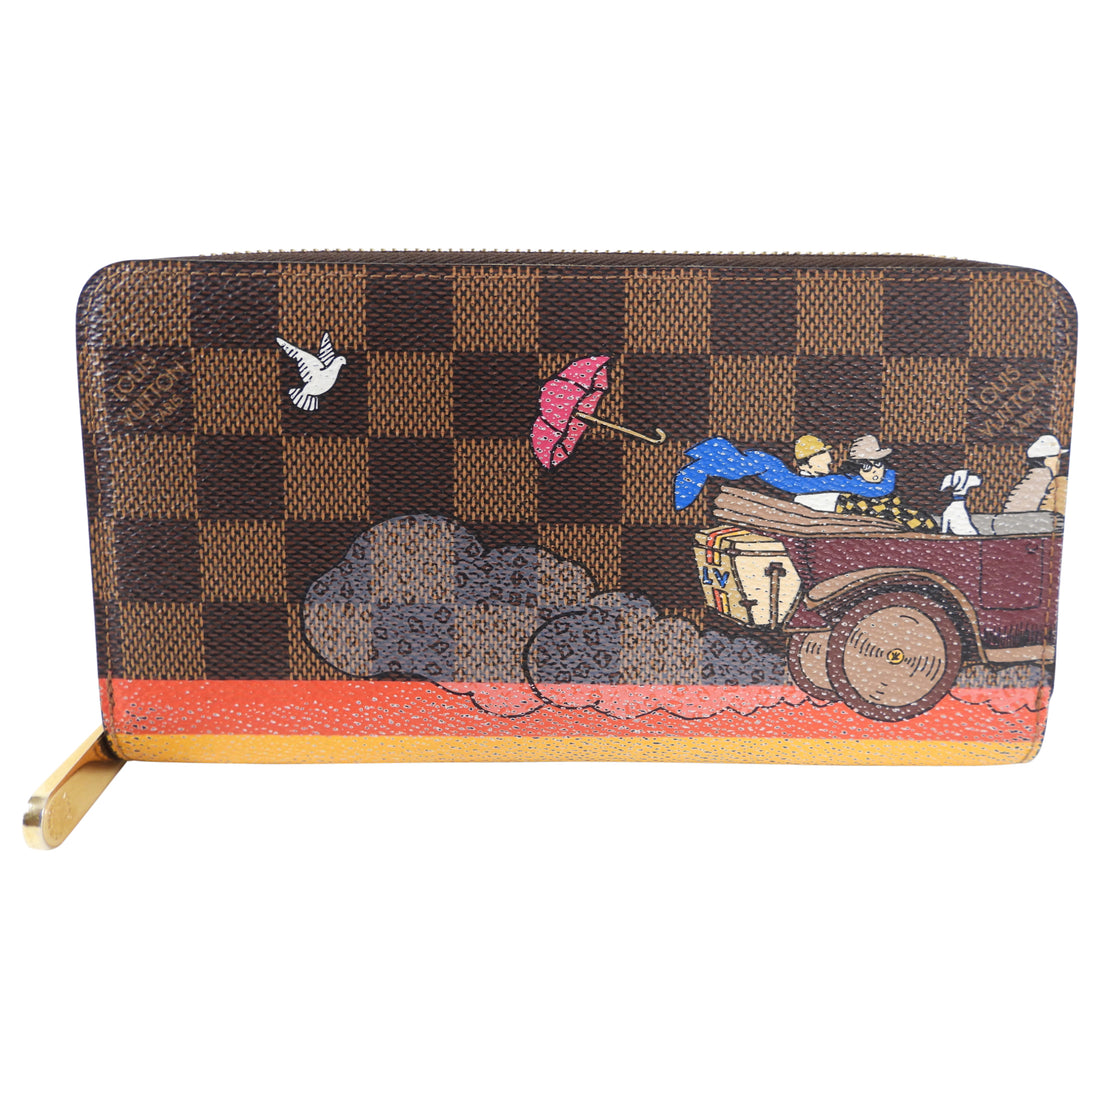 Louis Vuitton Limited Edition Christmas Animation Evasion Damier